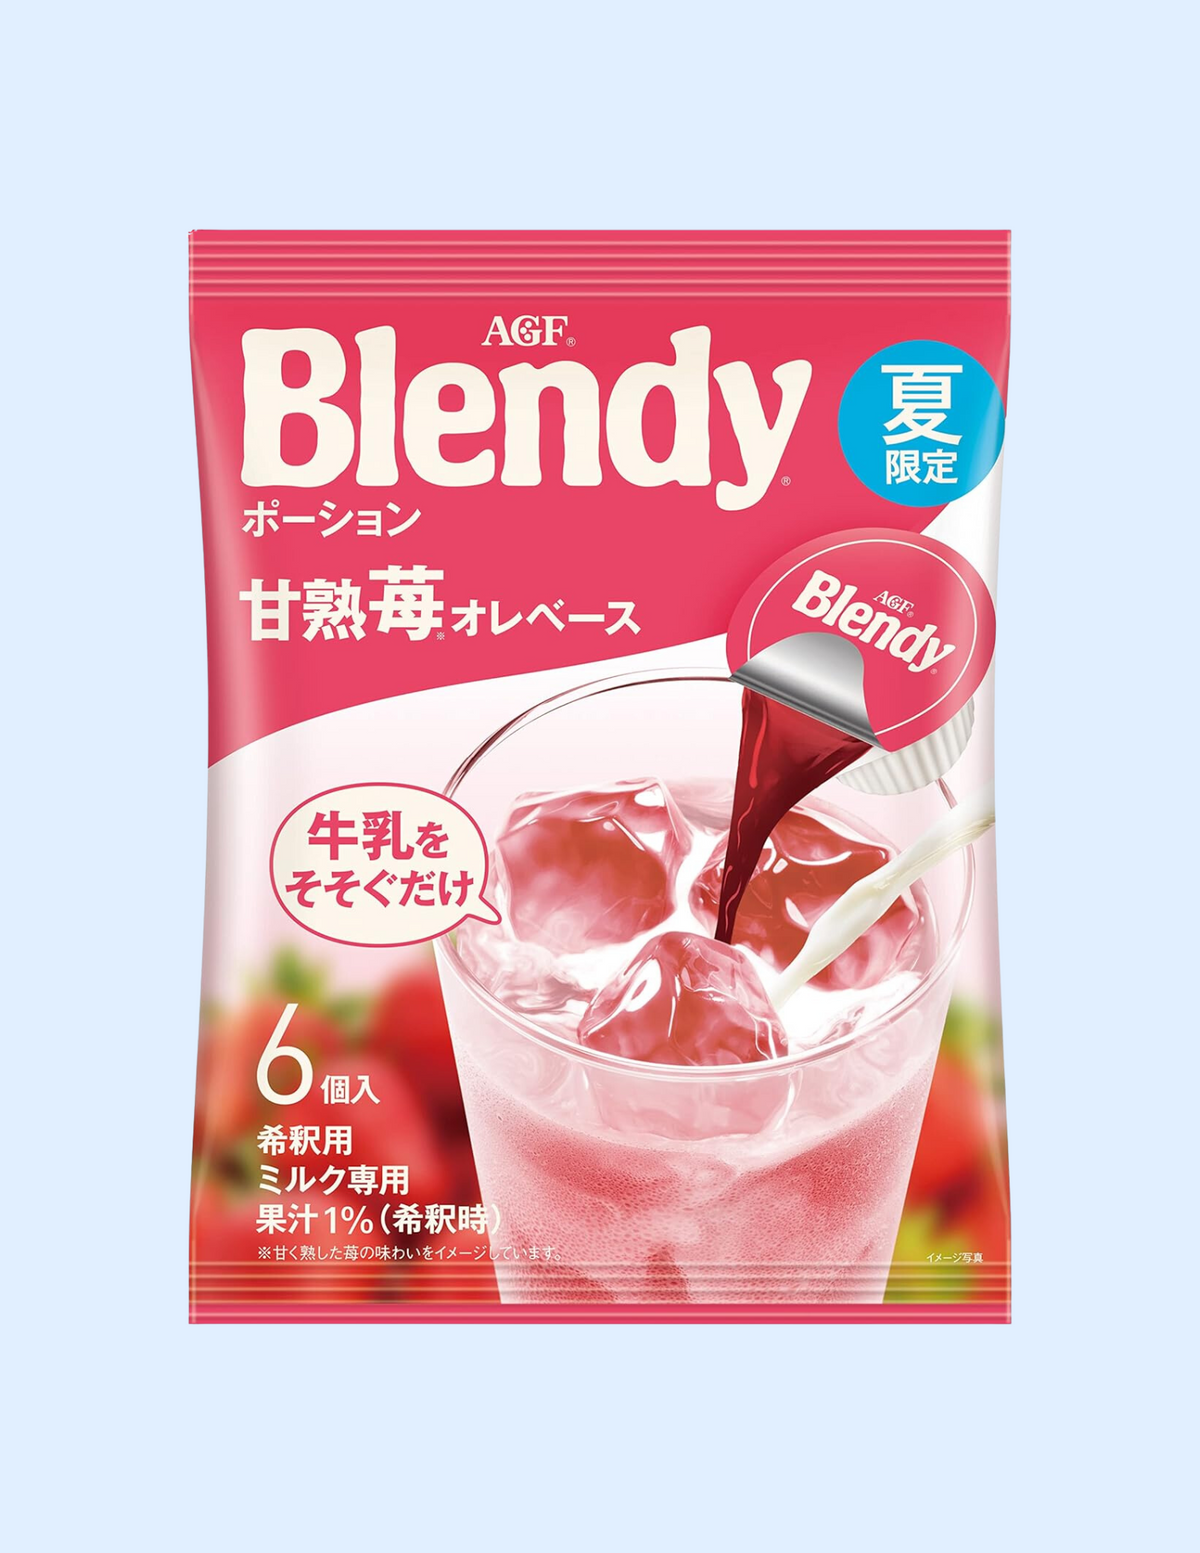 AGF Blendy Potion | Strawberry - Unique Bunny